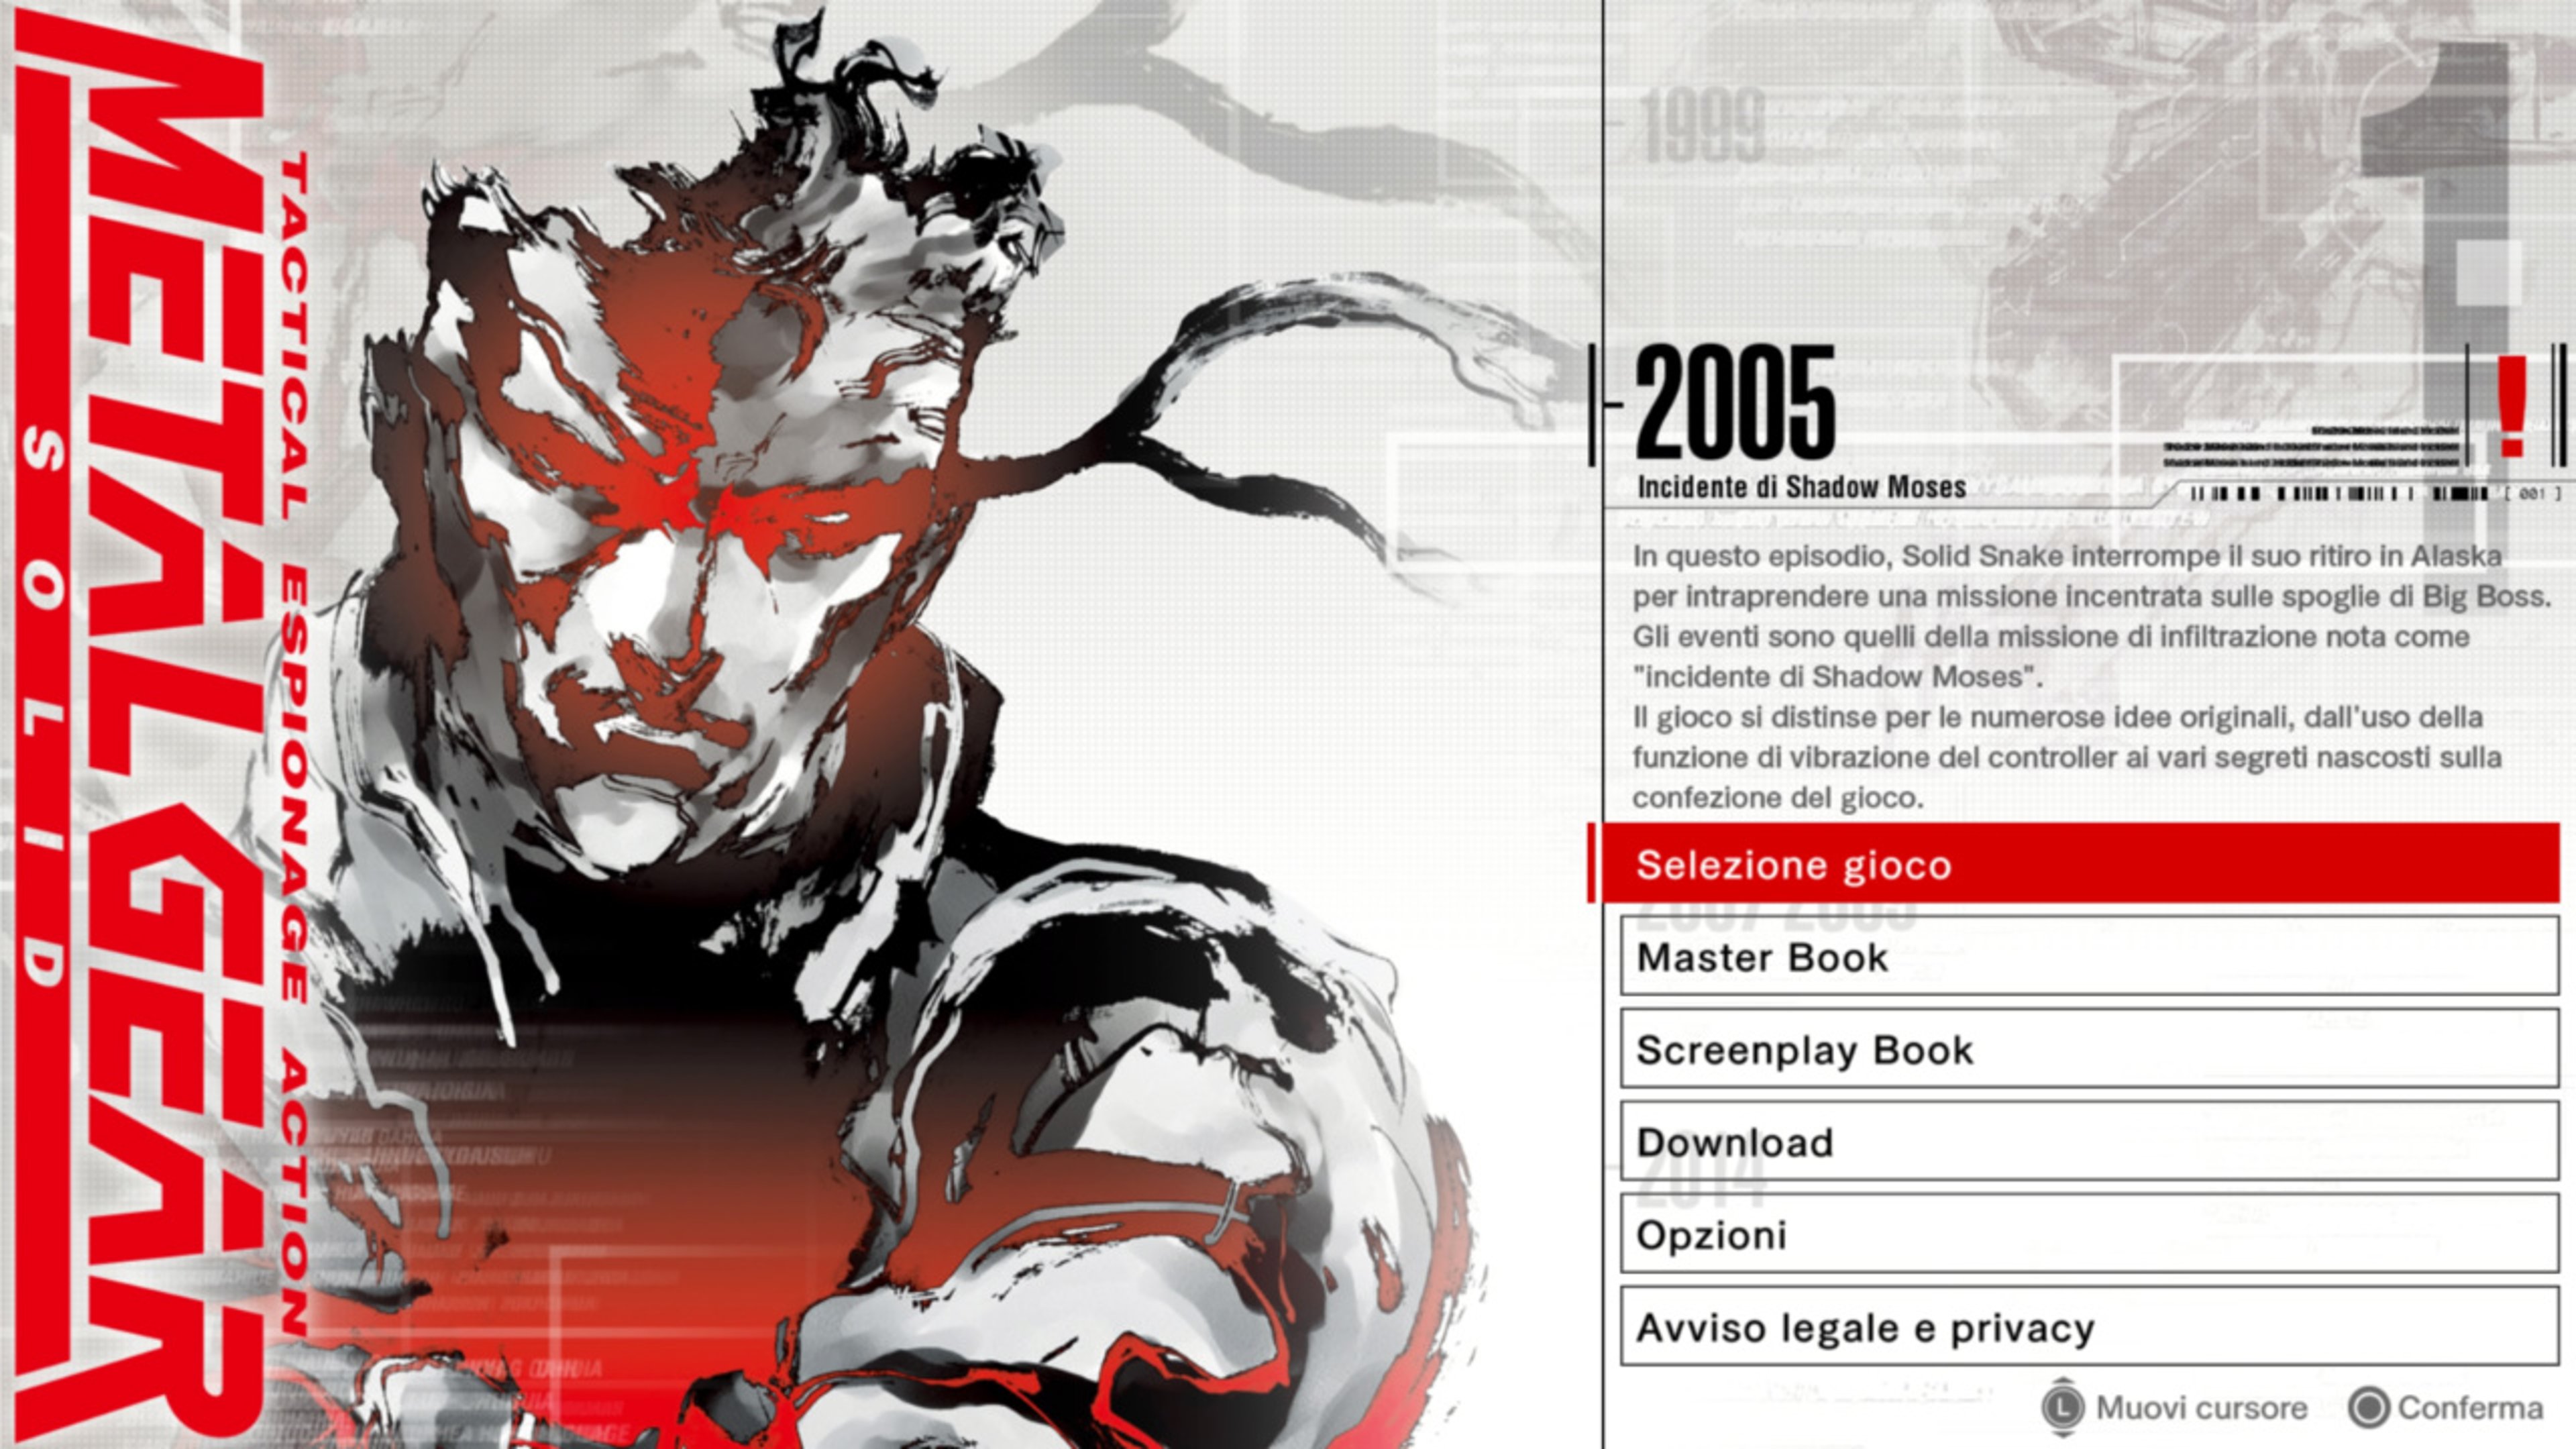 metal gear solid master collection